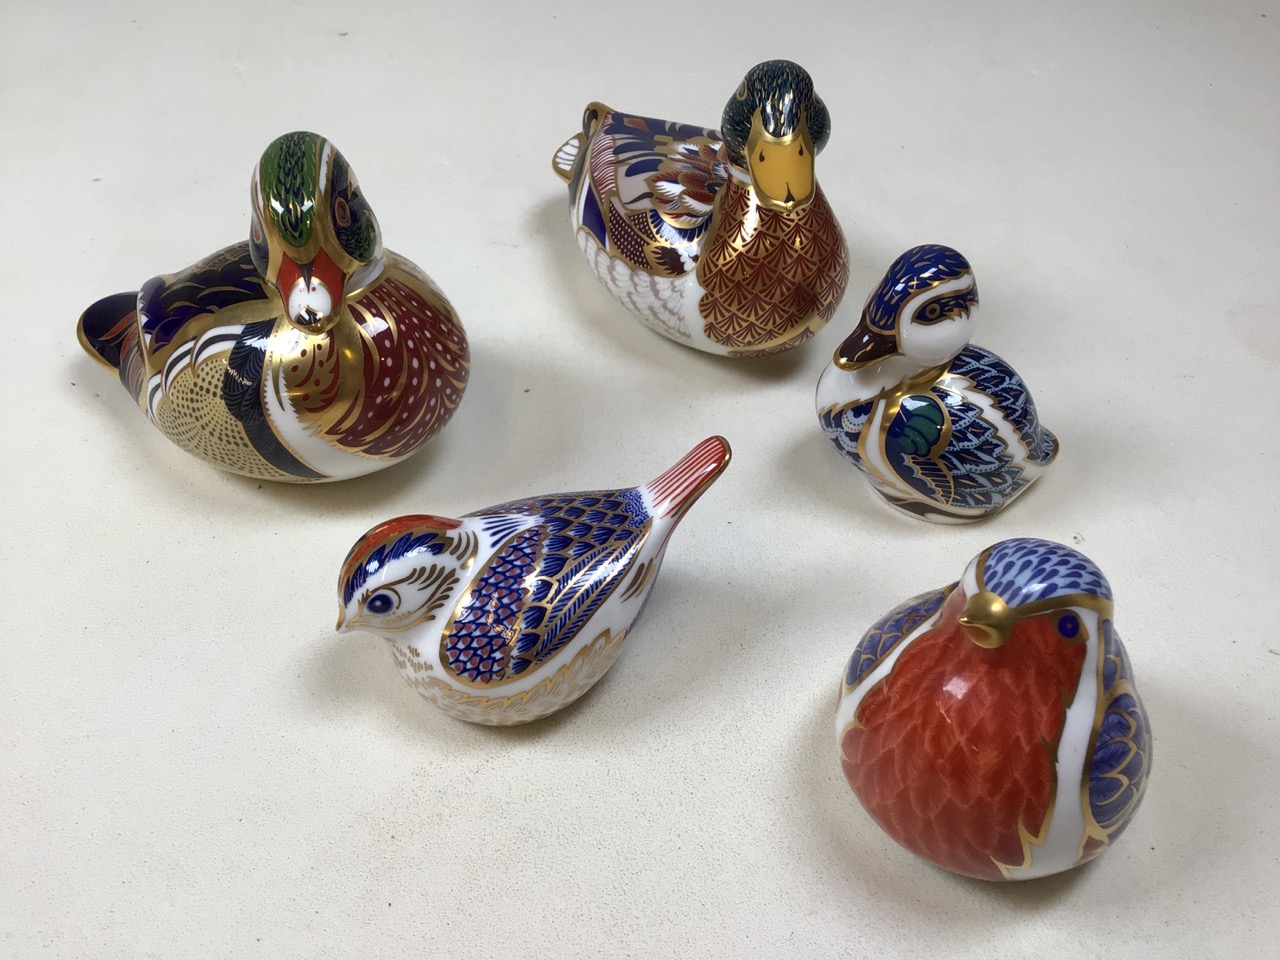 Royal Crown Derby paperweights of birds, includes three ducks and two birds. With silver and gold